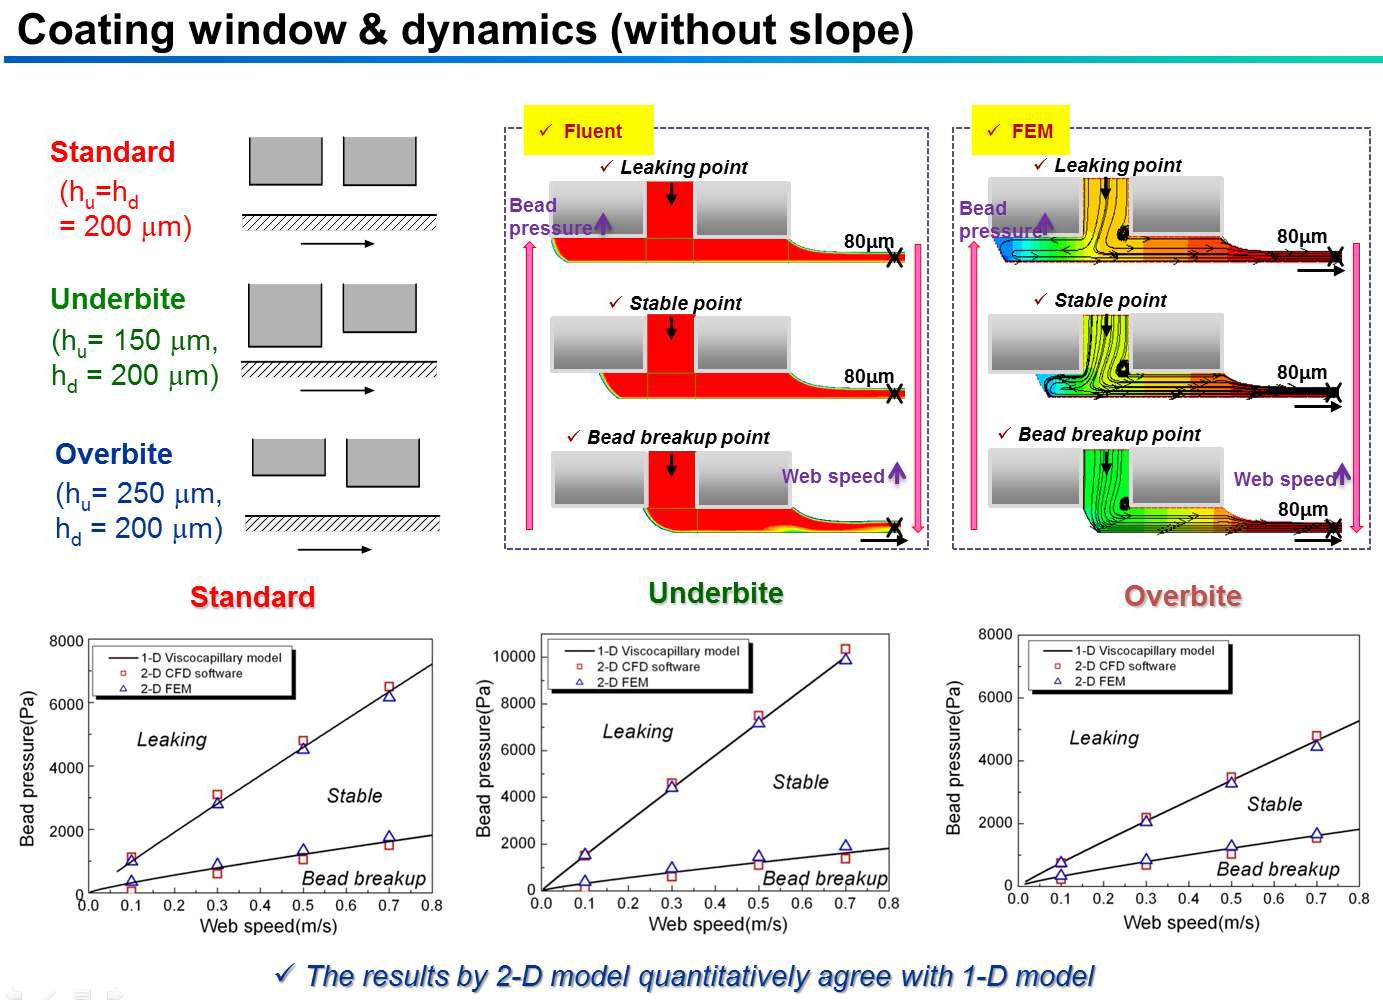 Comparison of operability coating windows obtained from FEM program and Fluent.